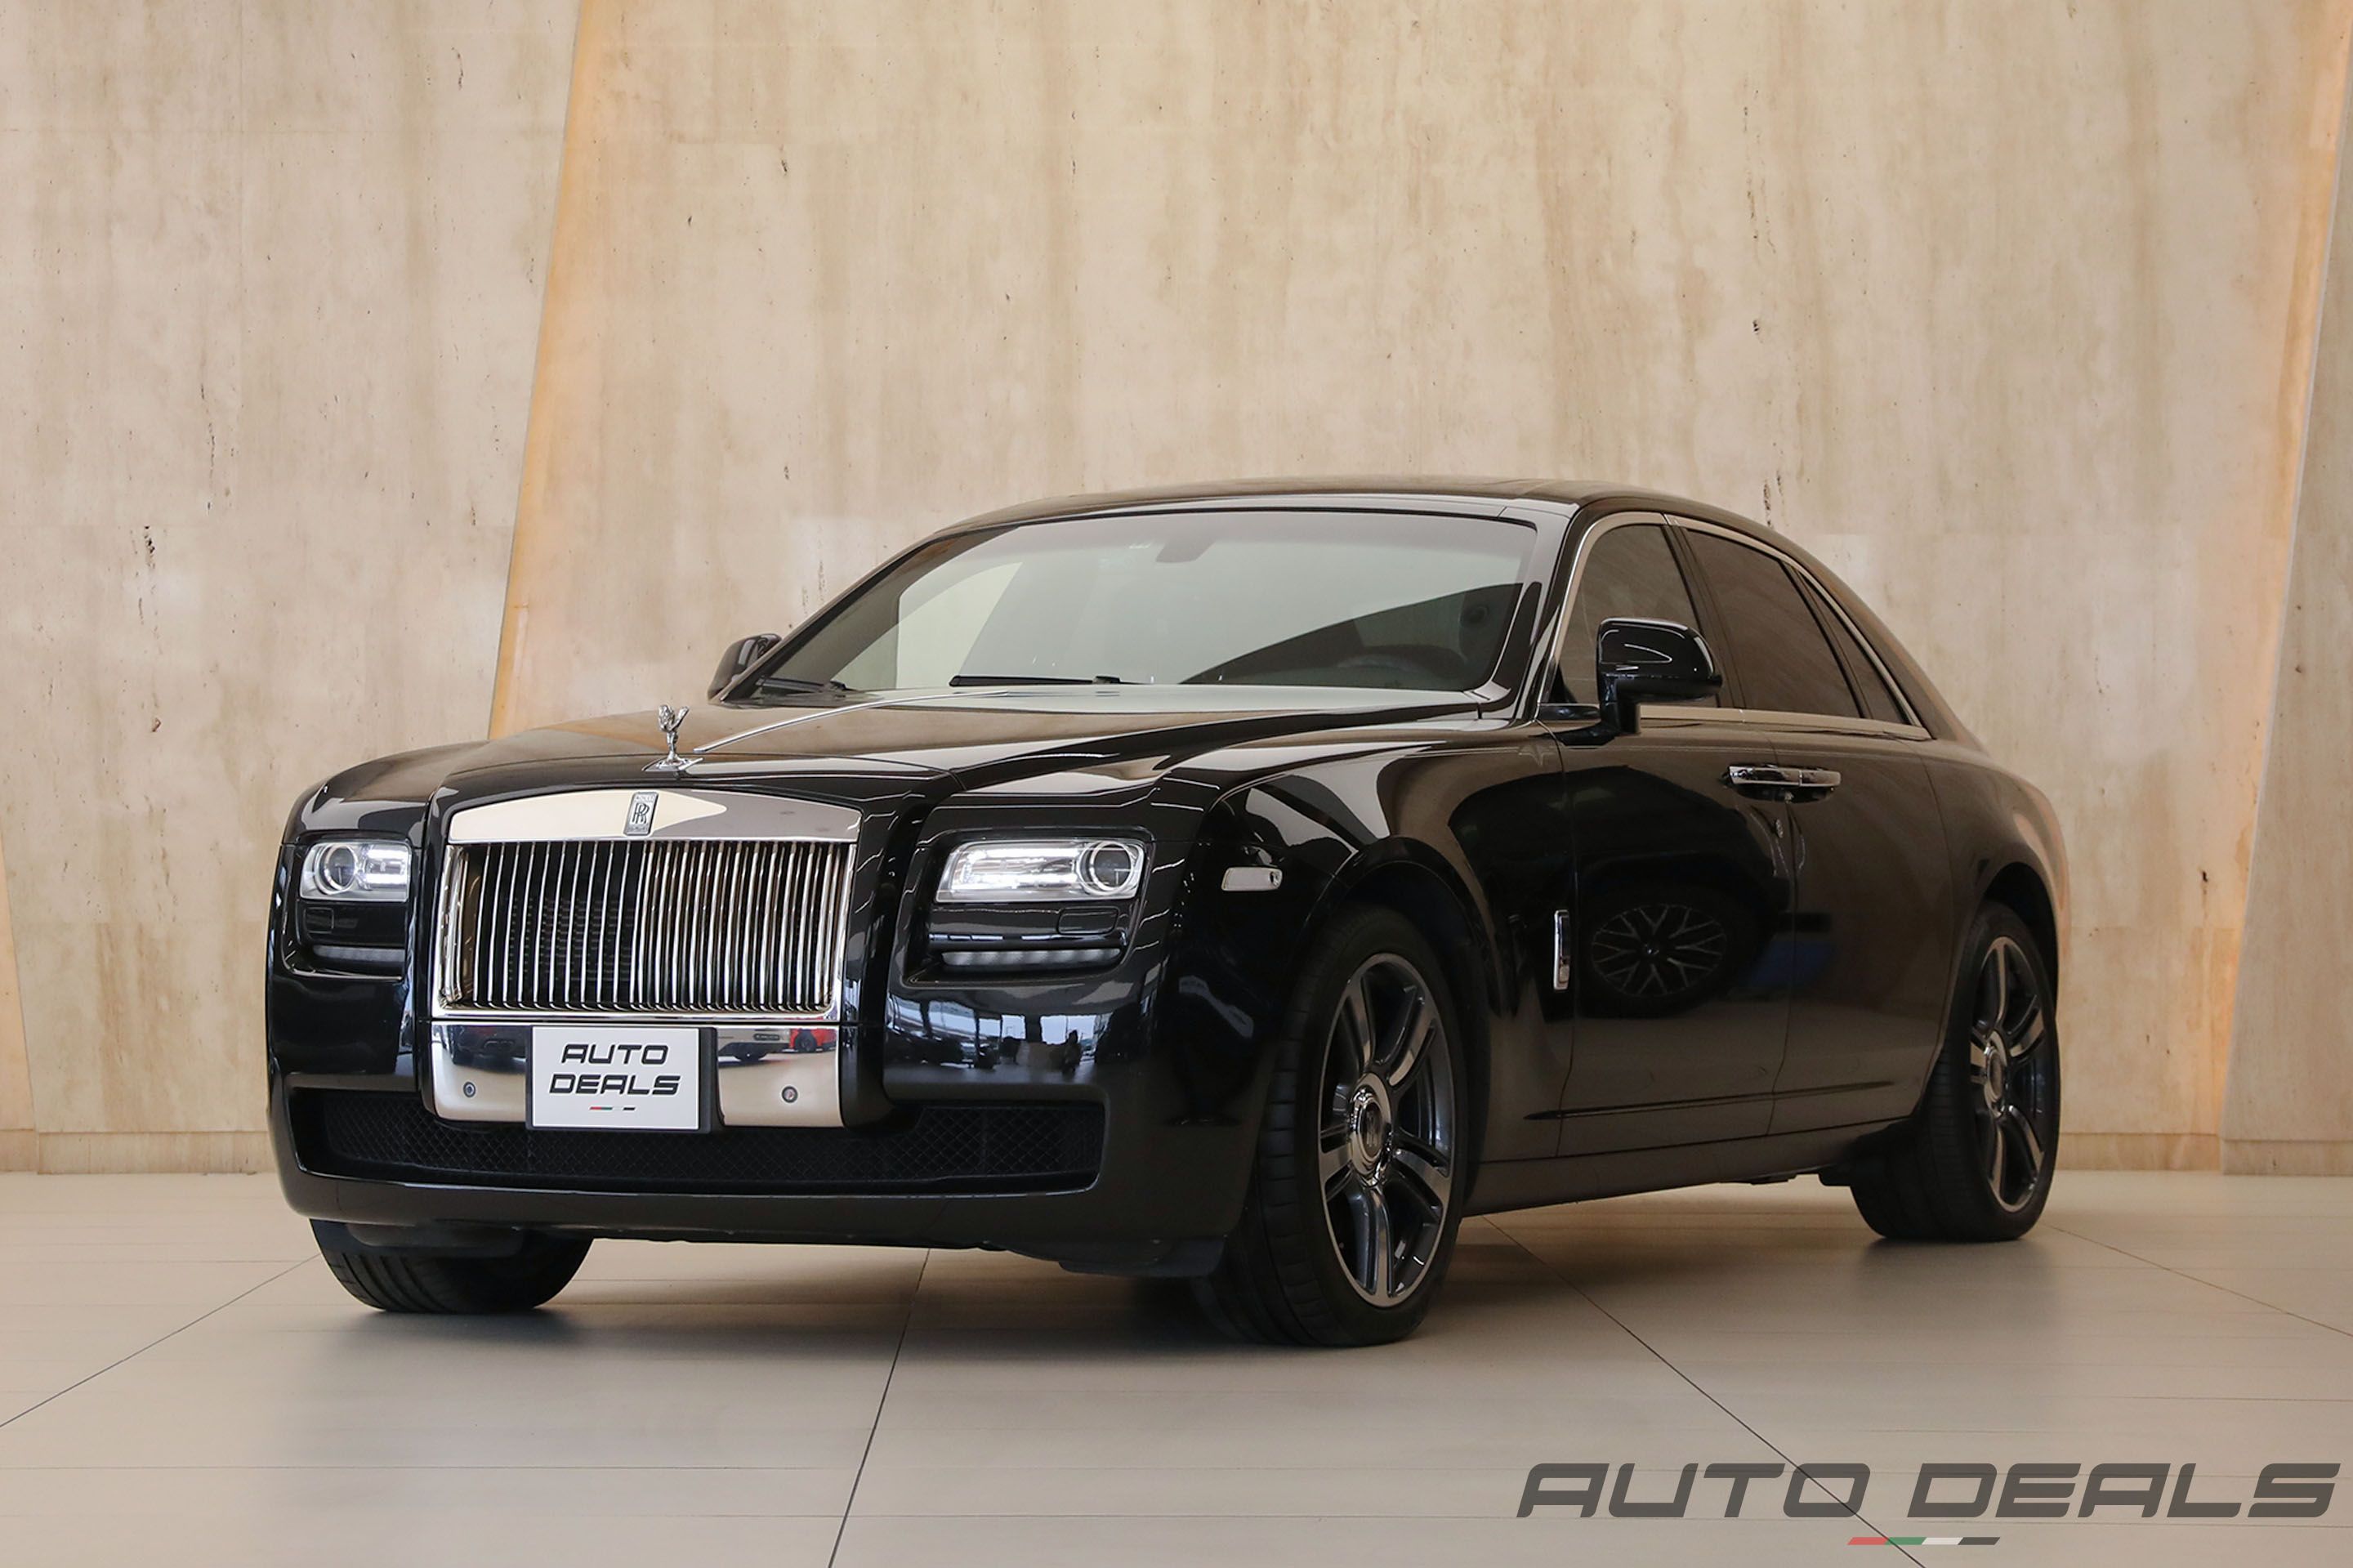 Rolls Royce Ghost V Special Edition | 2014 - Premium Quality - Top of the Line - Pristine Condition | 6.6L V12